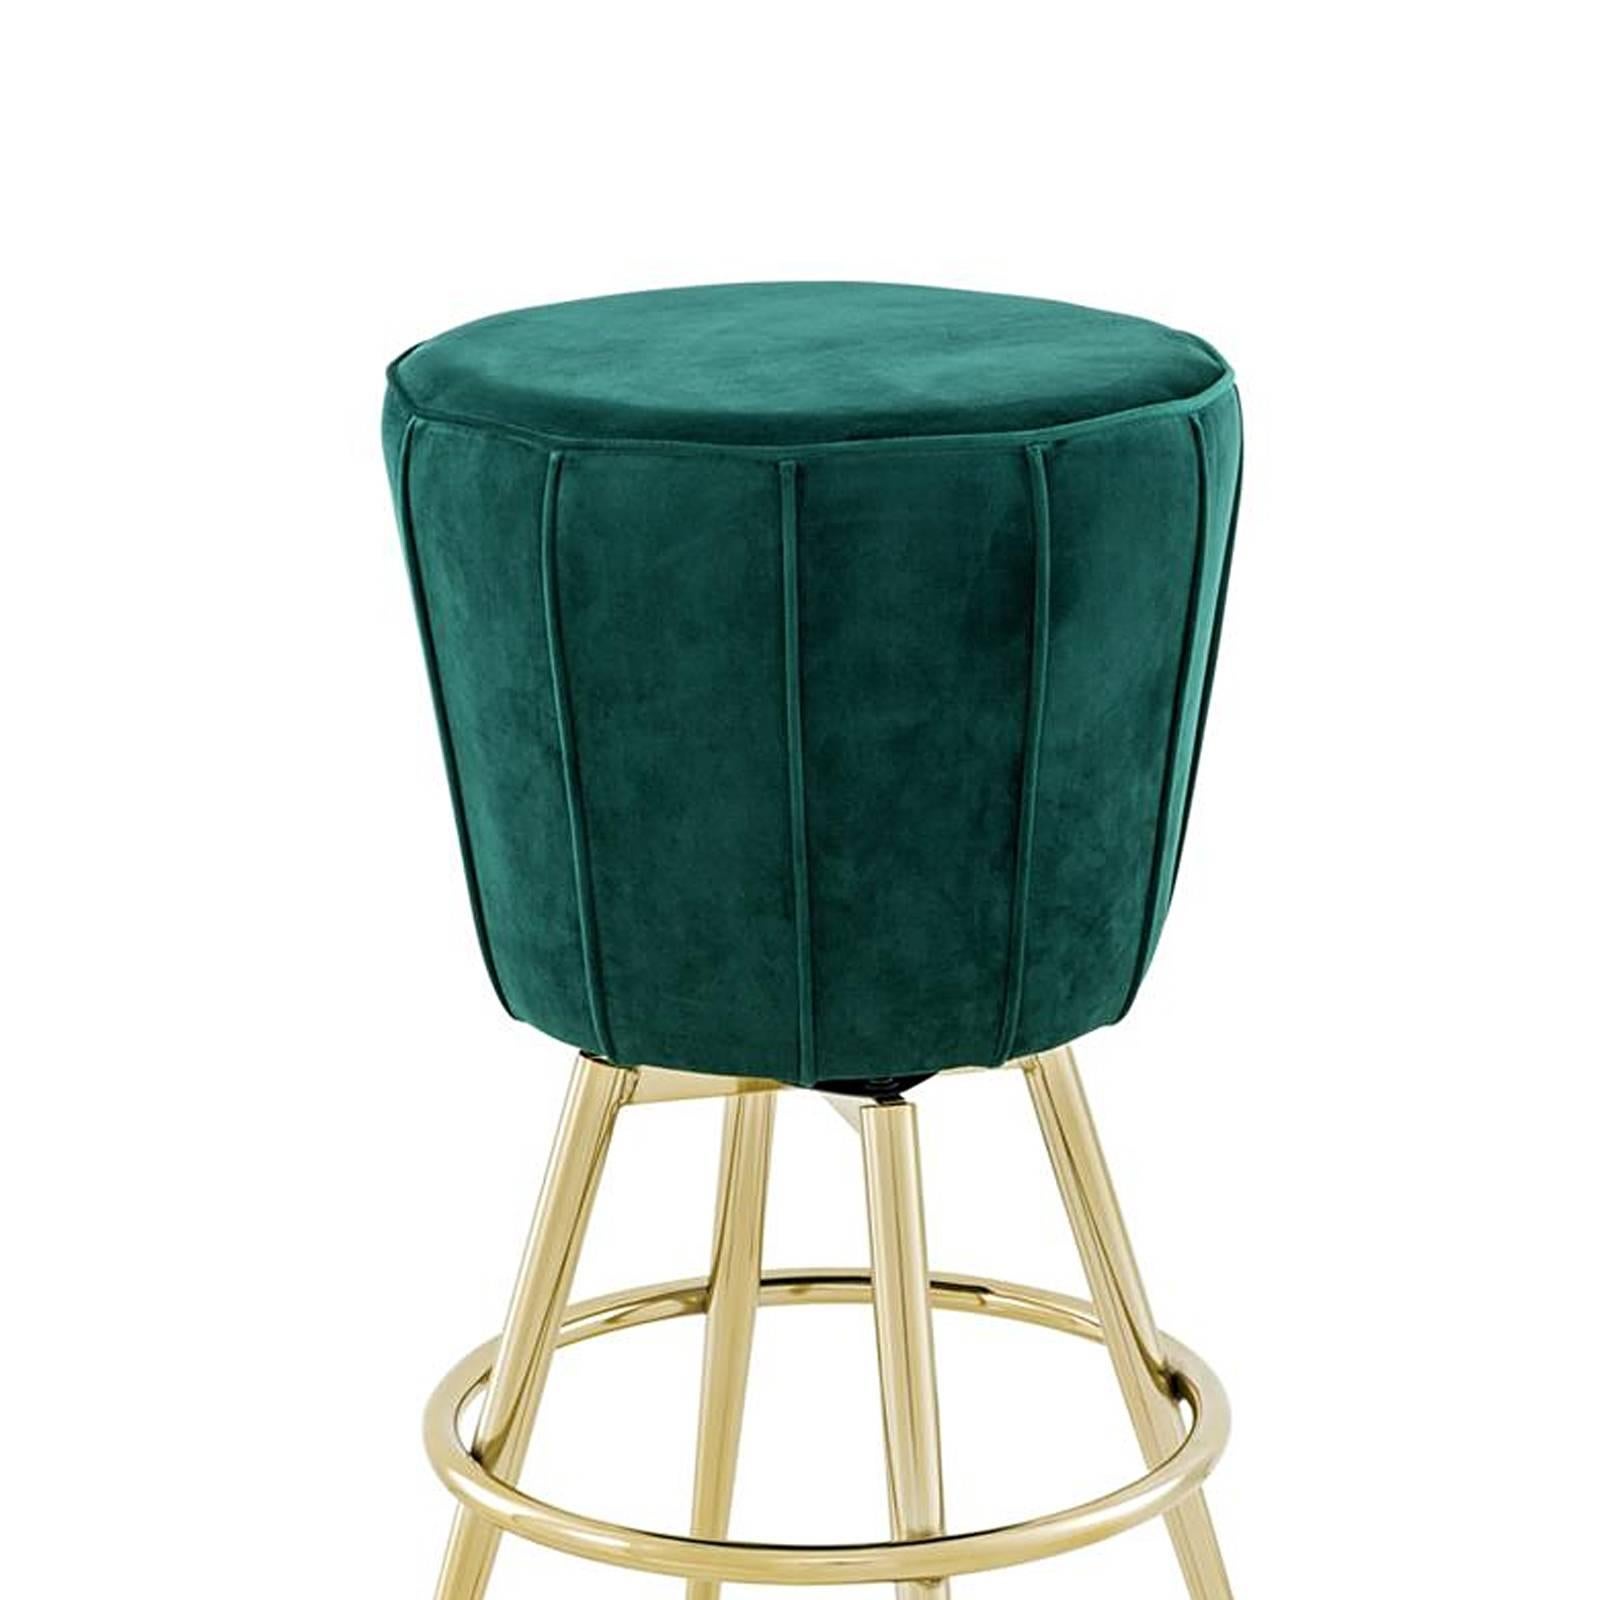 Stool saloon with structure in wood. Seat upholstered
with green velvet fabric. With champagne gold finish feet.
Saloon bar in green velvet available but not included.
